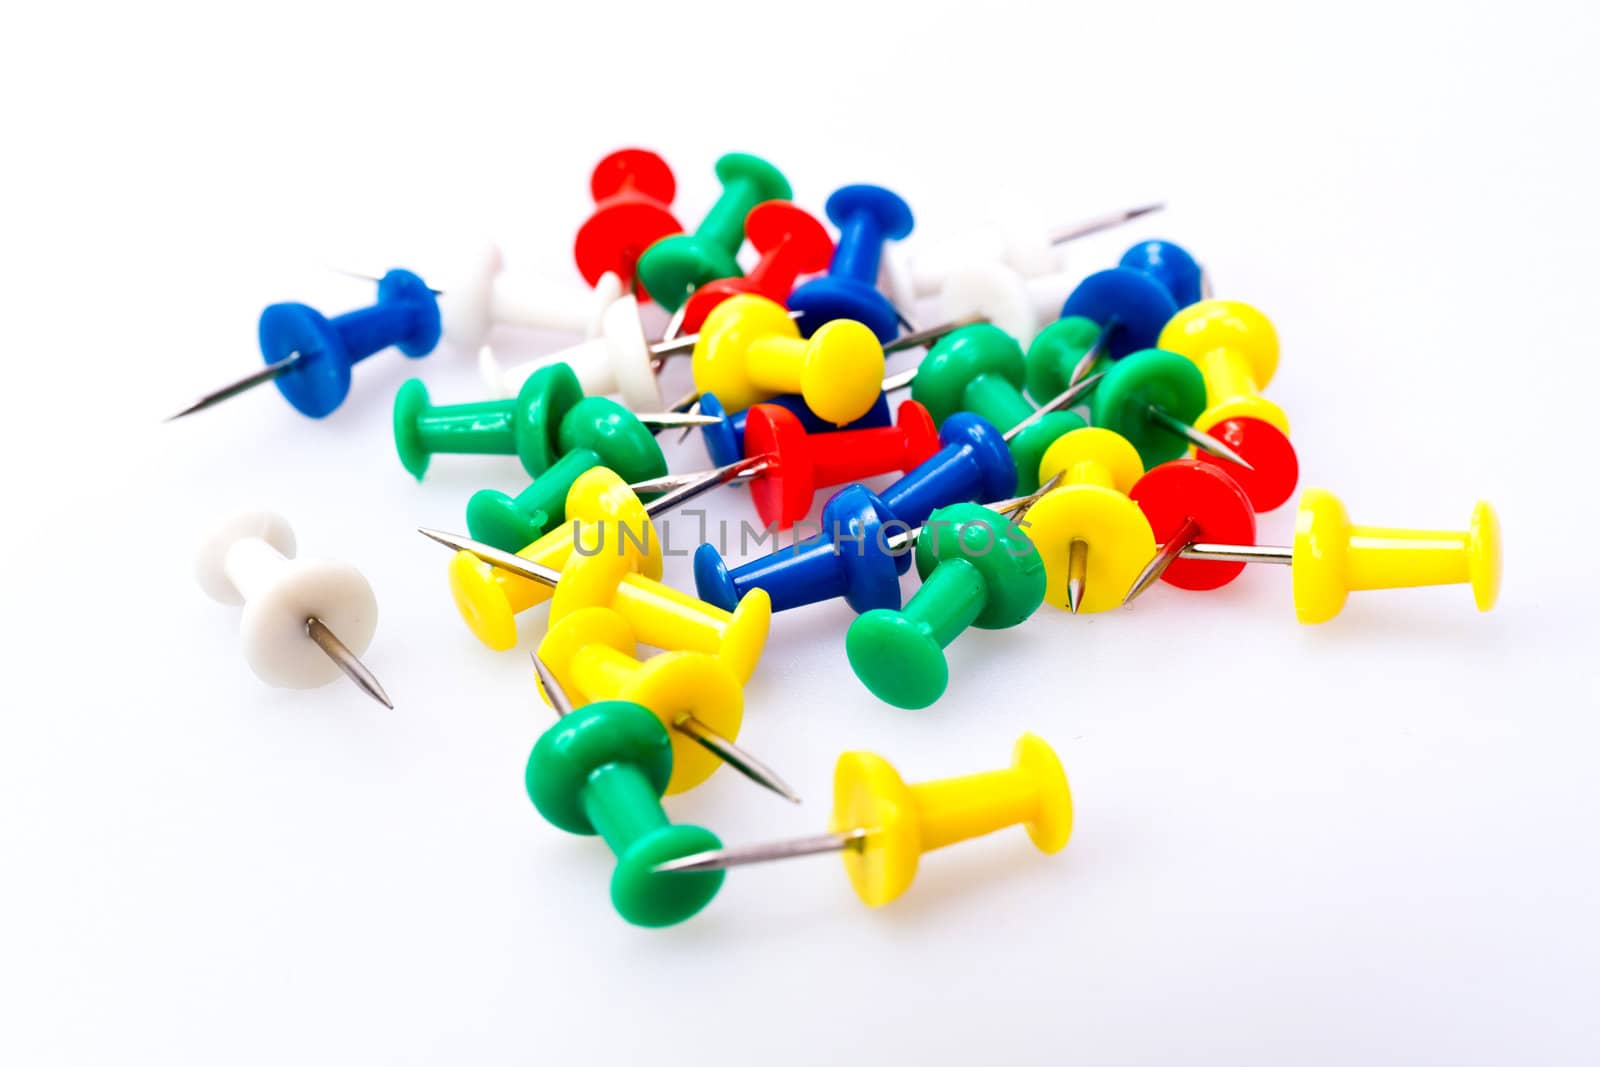 Colorful plastic pushpin on white background